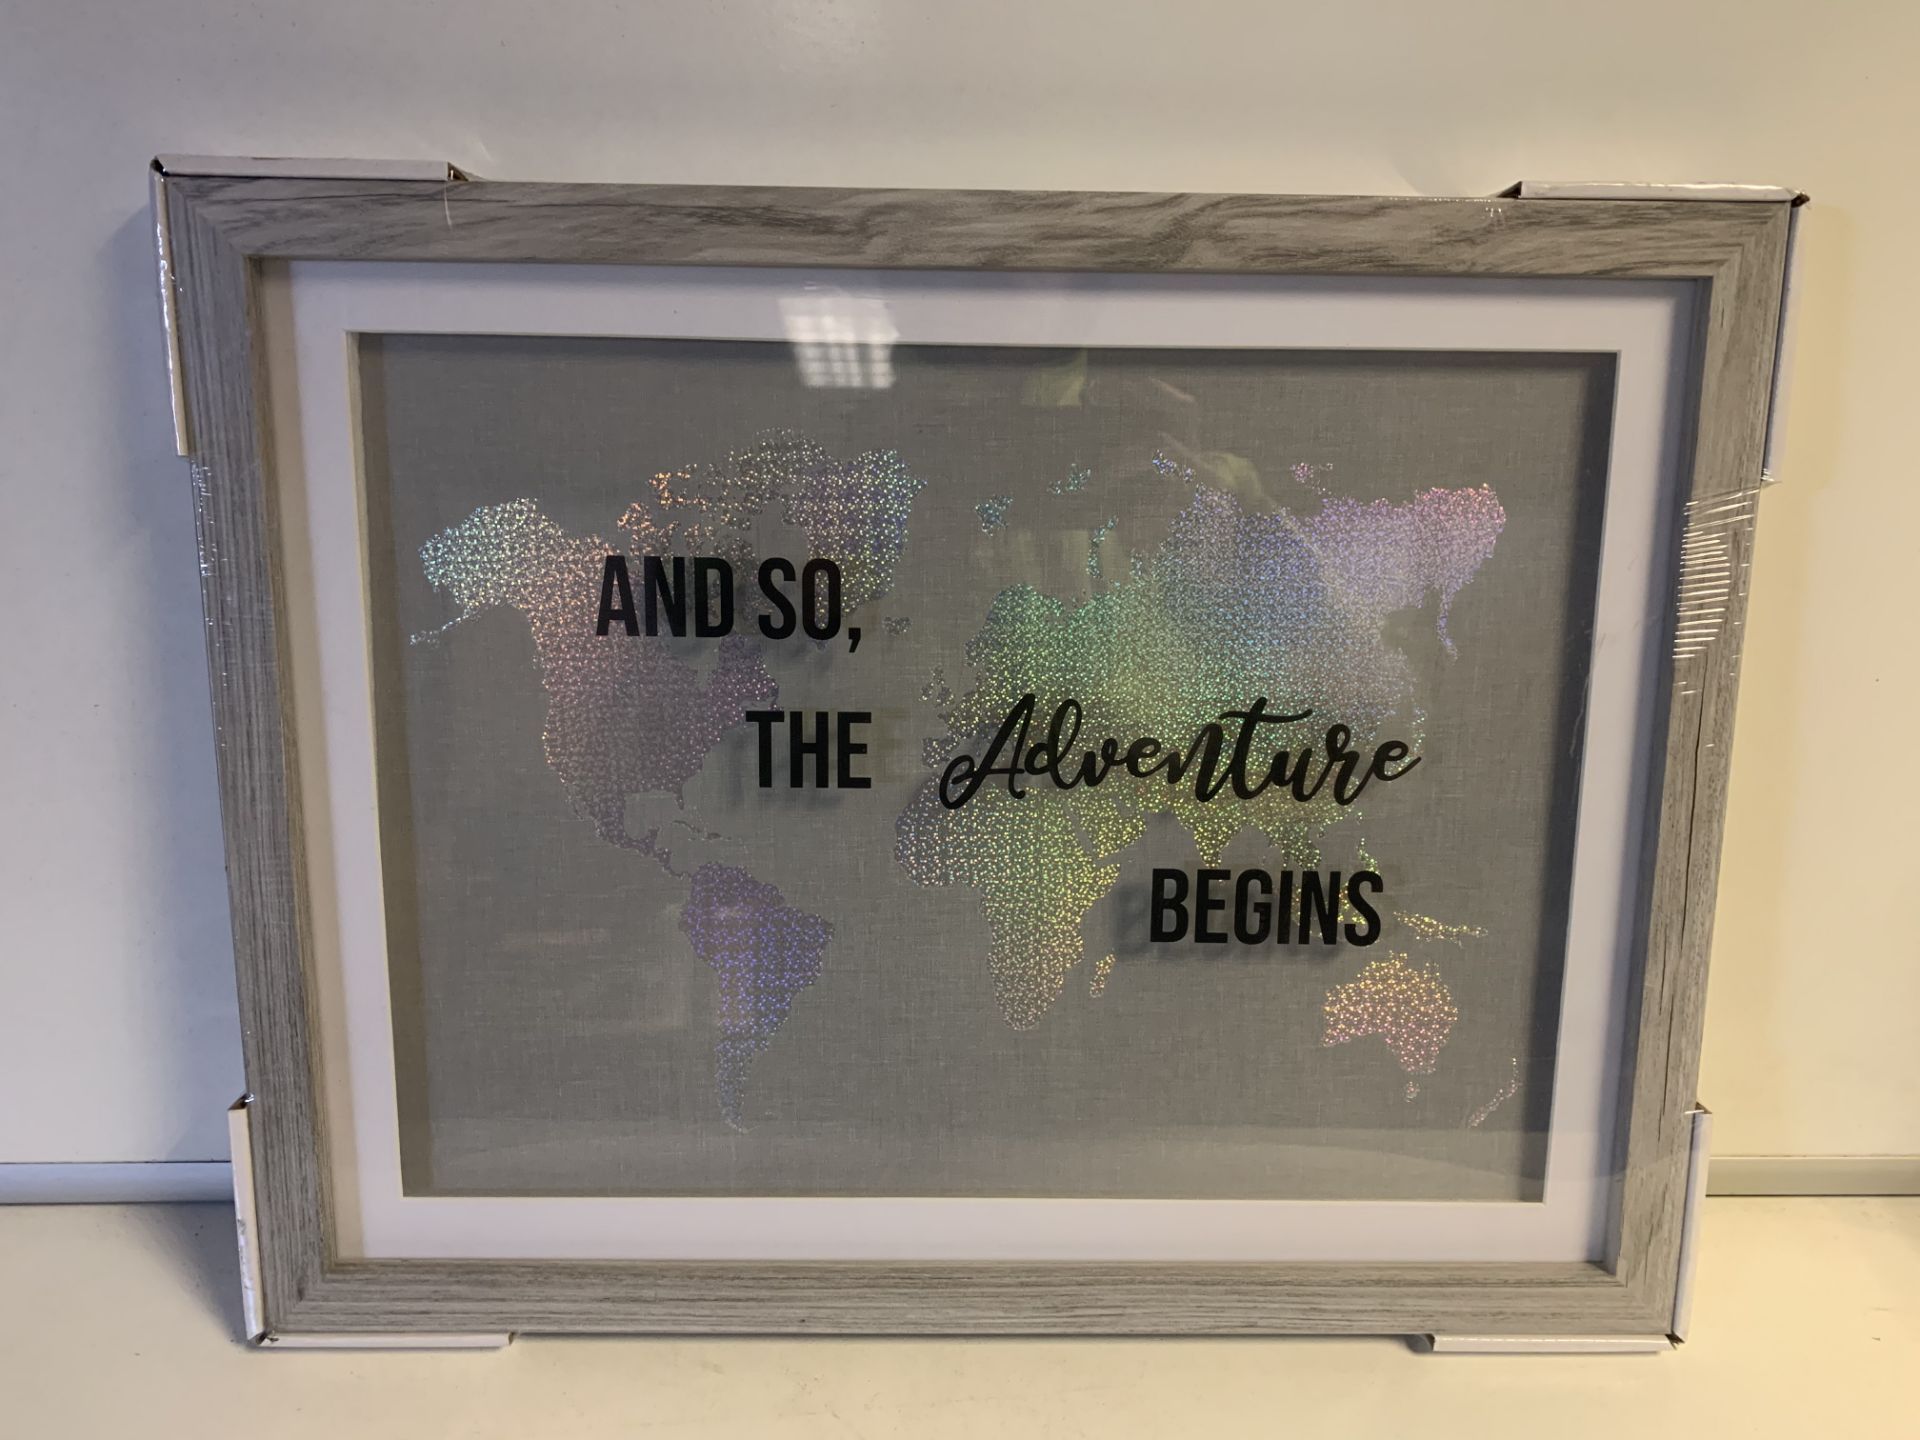 24 x NEW SEALED ARTHOUSE 'AND SO THE ADVENTURE BEGINS' HOLOGRAPHIC MAP FRAMED PRINT (1465/20)